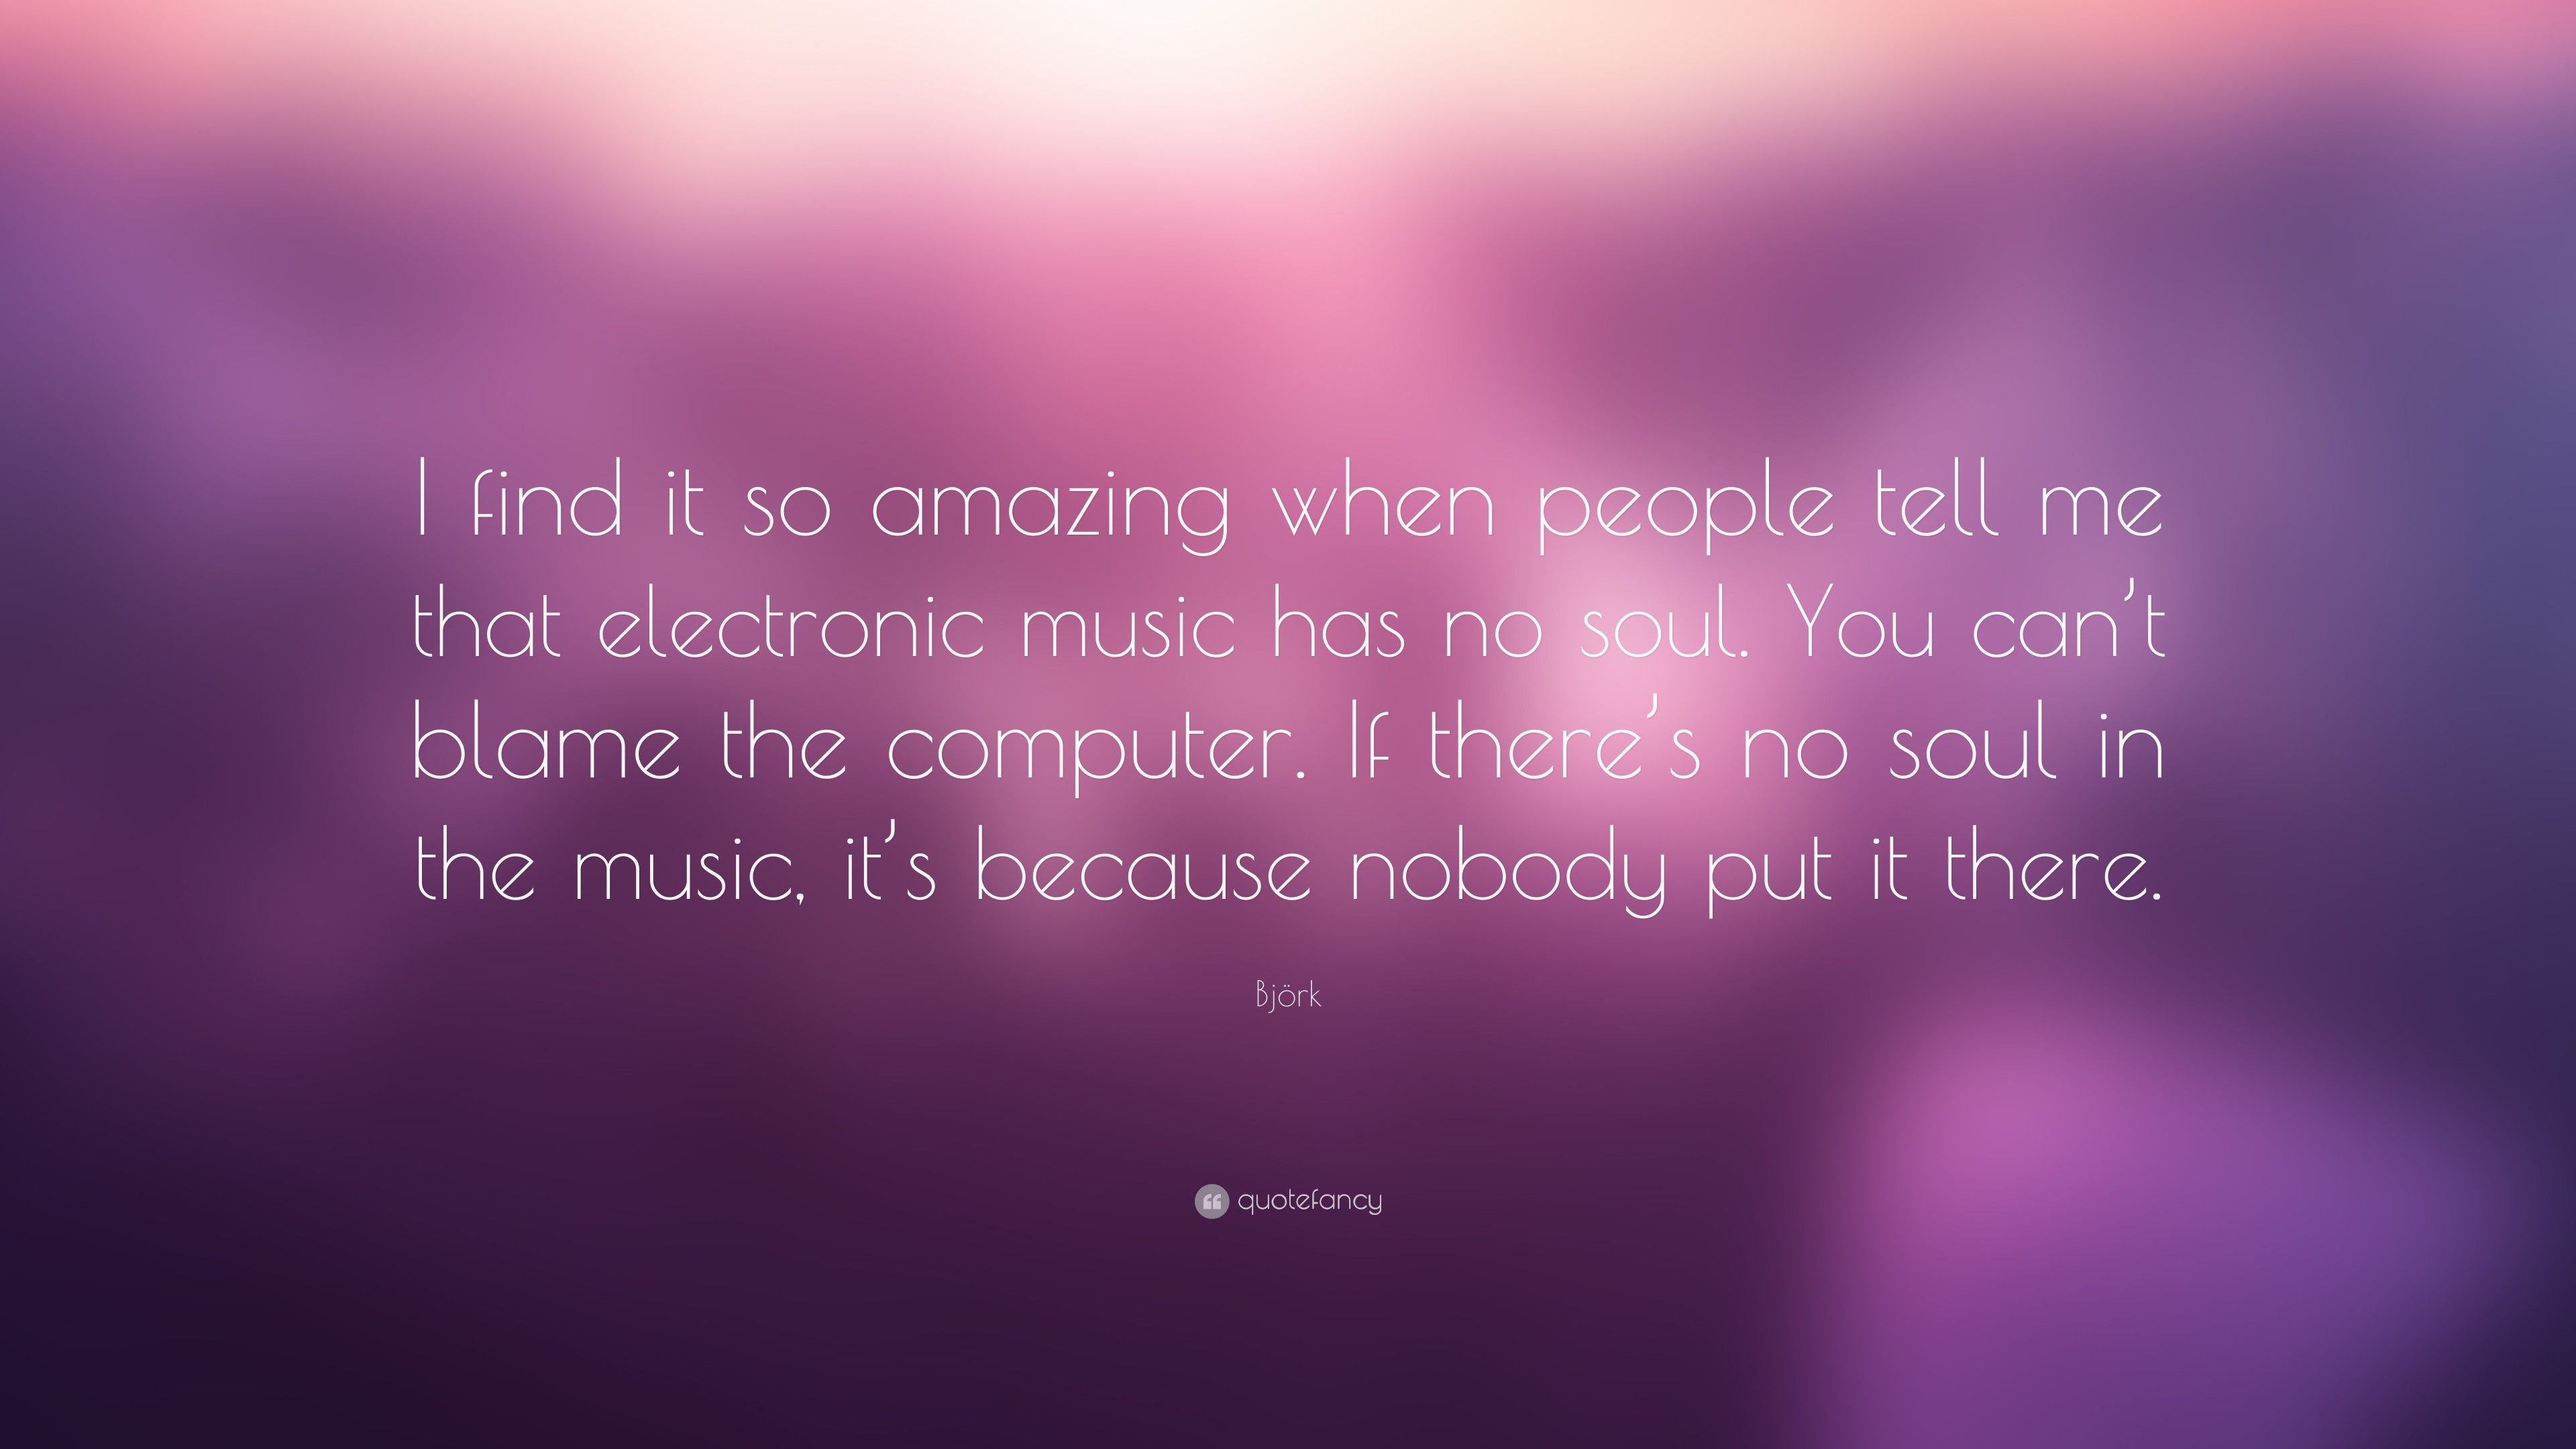 3840x2160 BjÃ¶rk Quote: “I find it so amazing when people tell me that electronic music